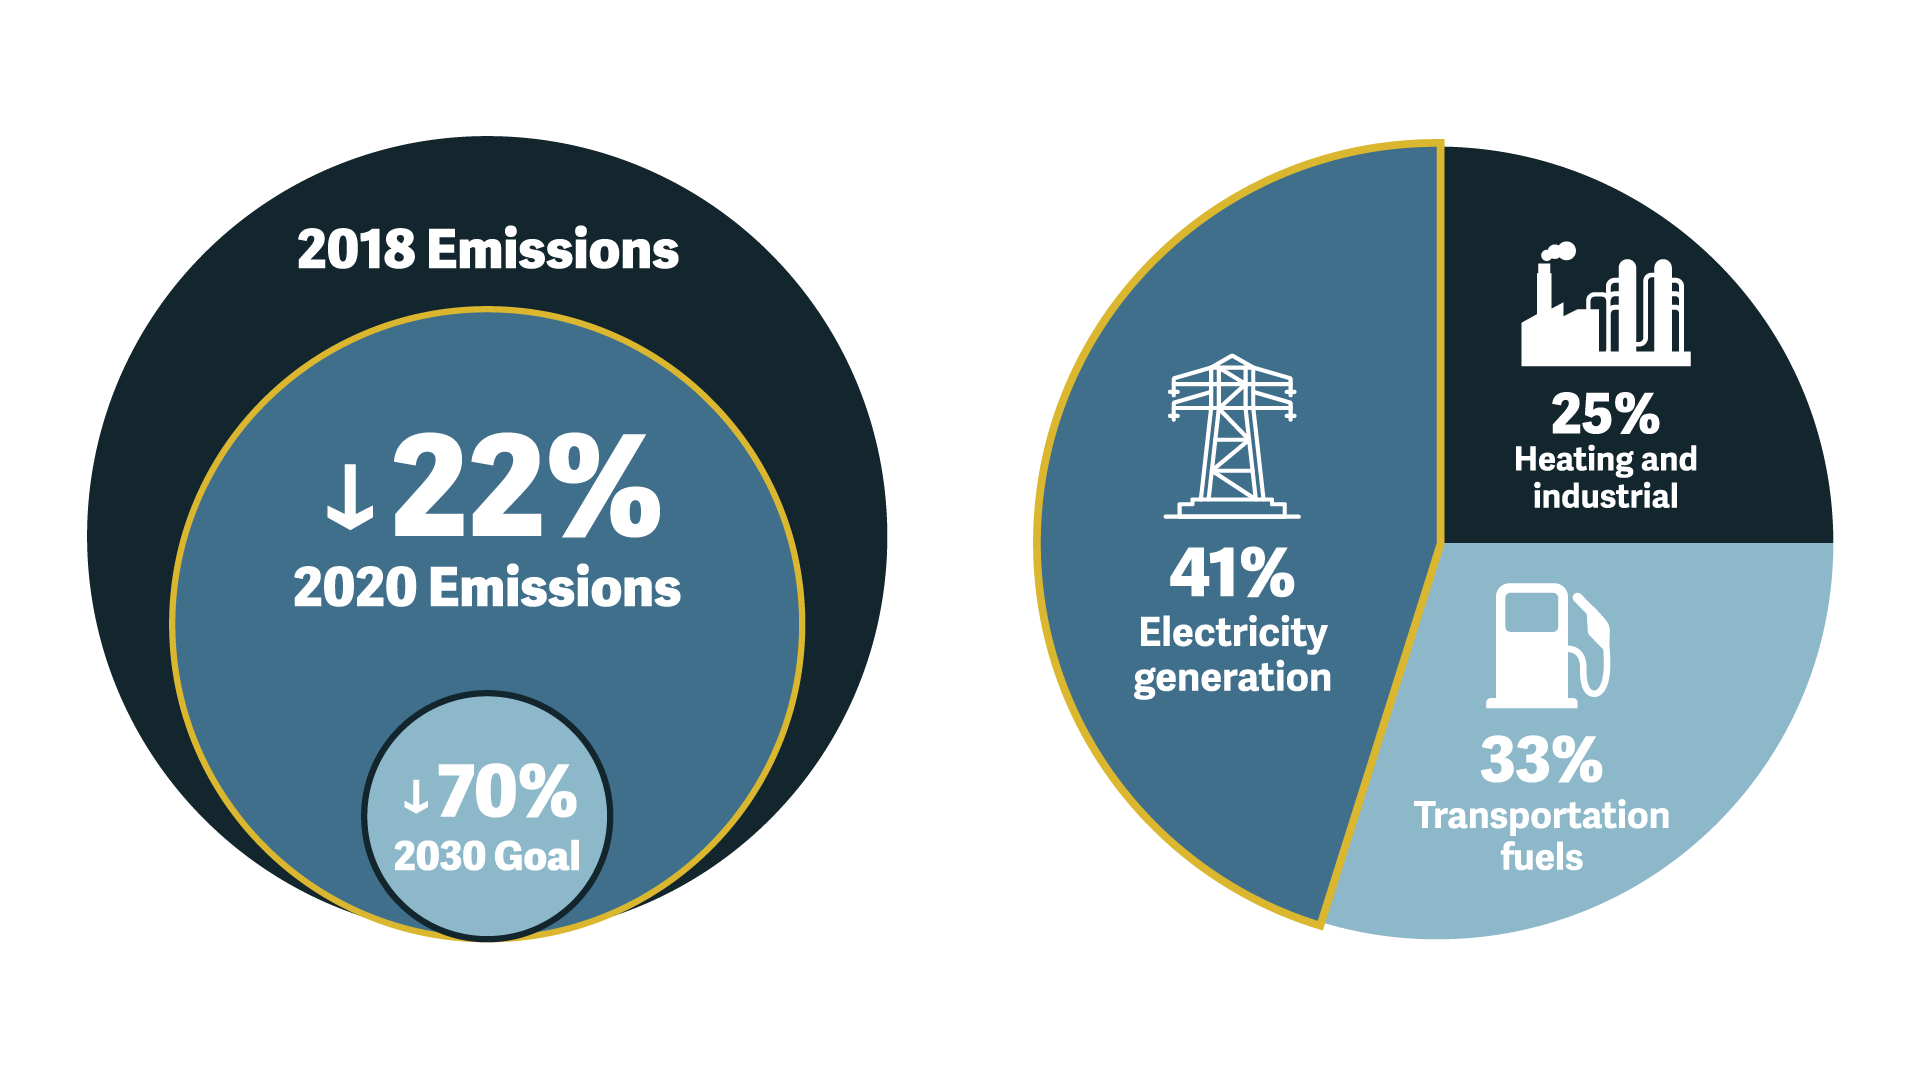 Emissions are down 22% since 2018 and Electricity generation remains the community's largest source of emissions